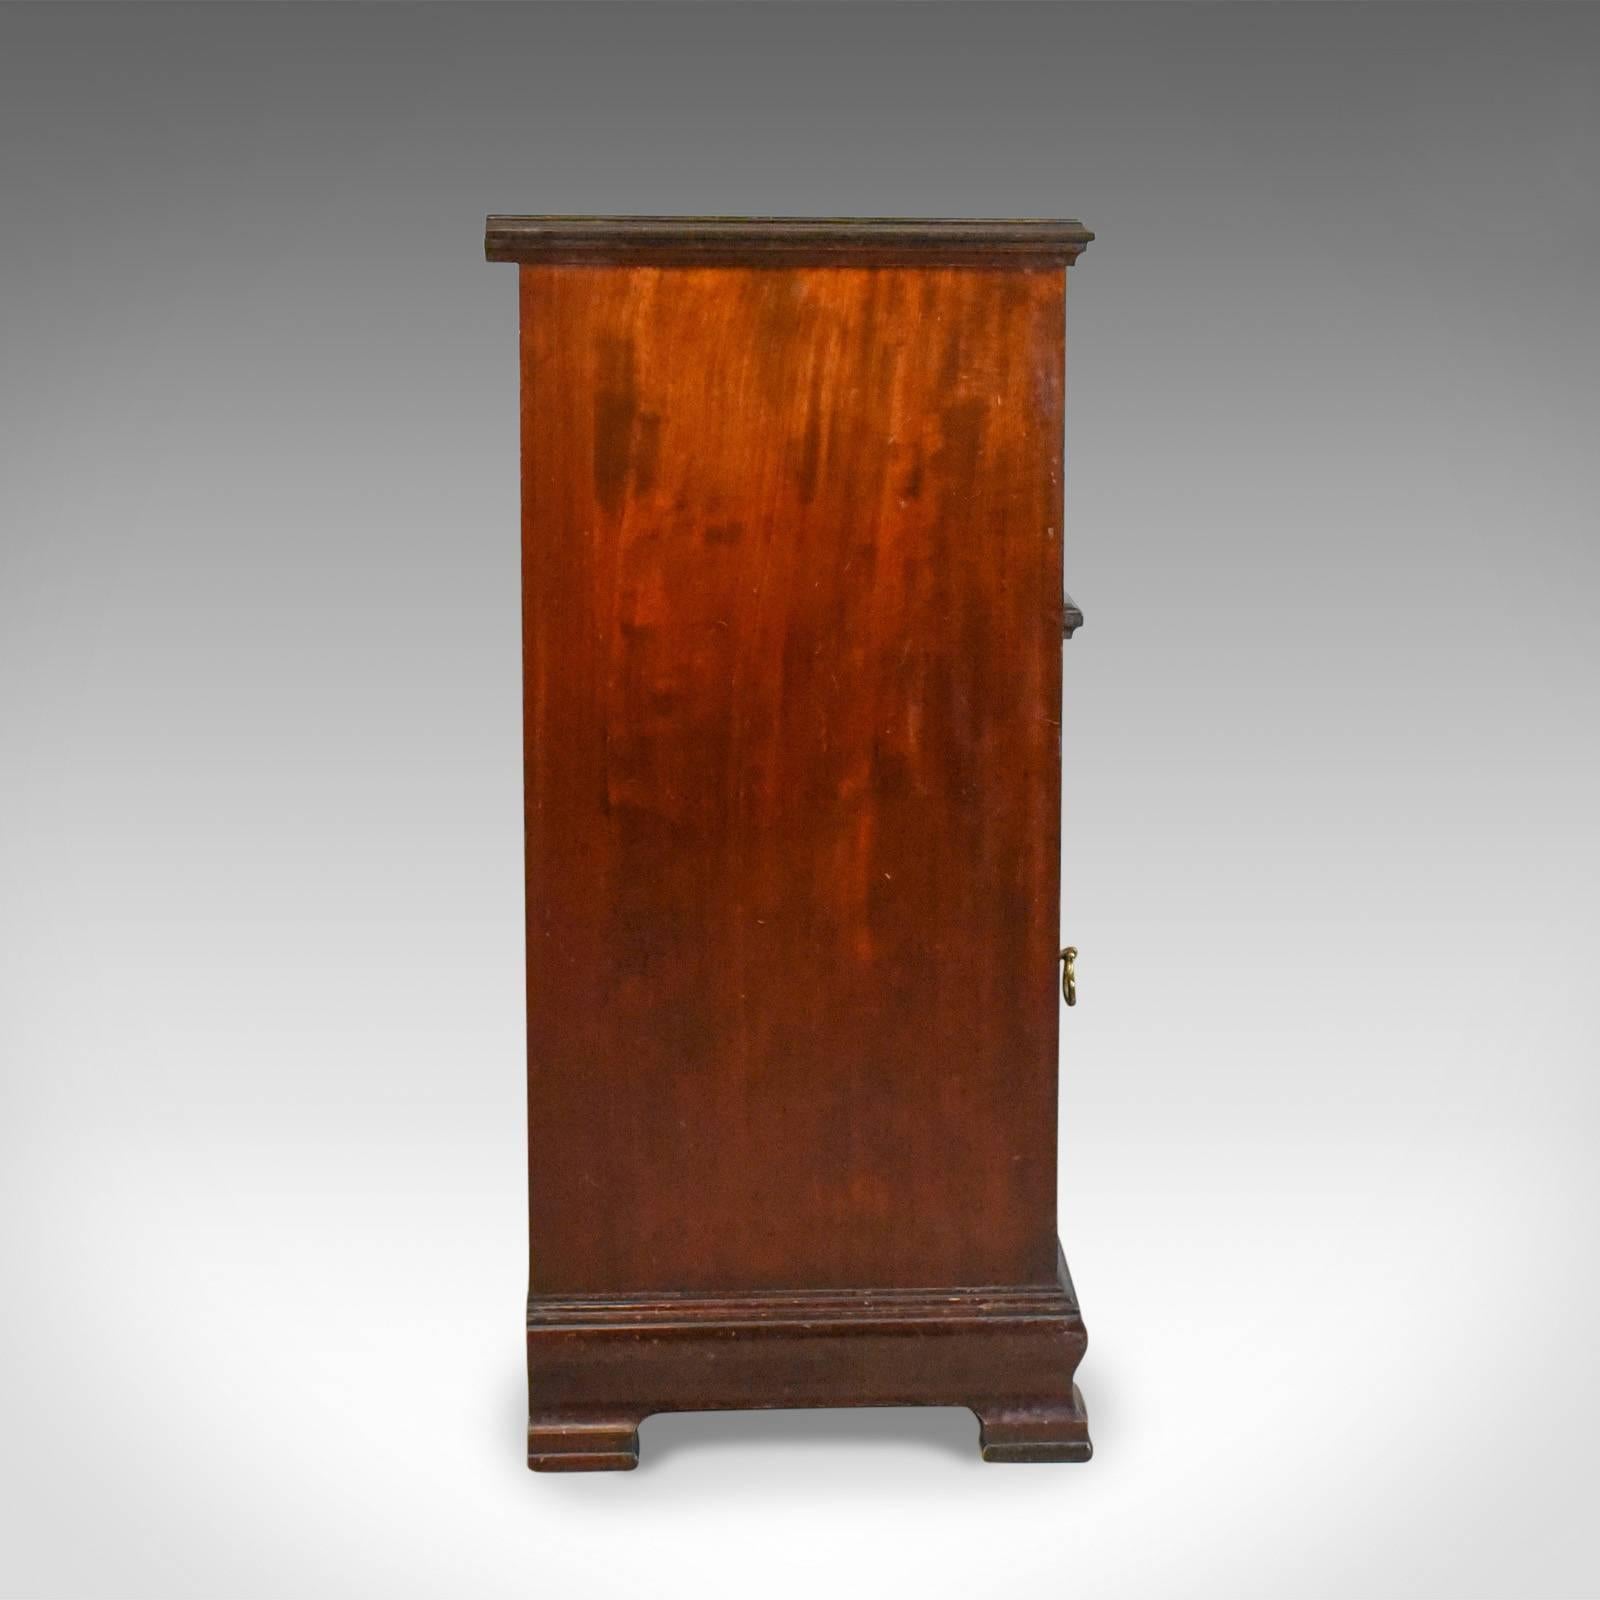 Edwardian Antique Bedside Cabinet, Carved Mahogany Nightstand, English, circa 1910